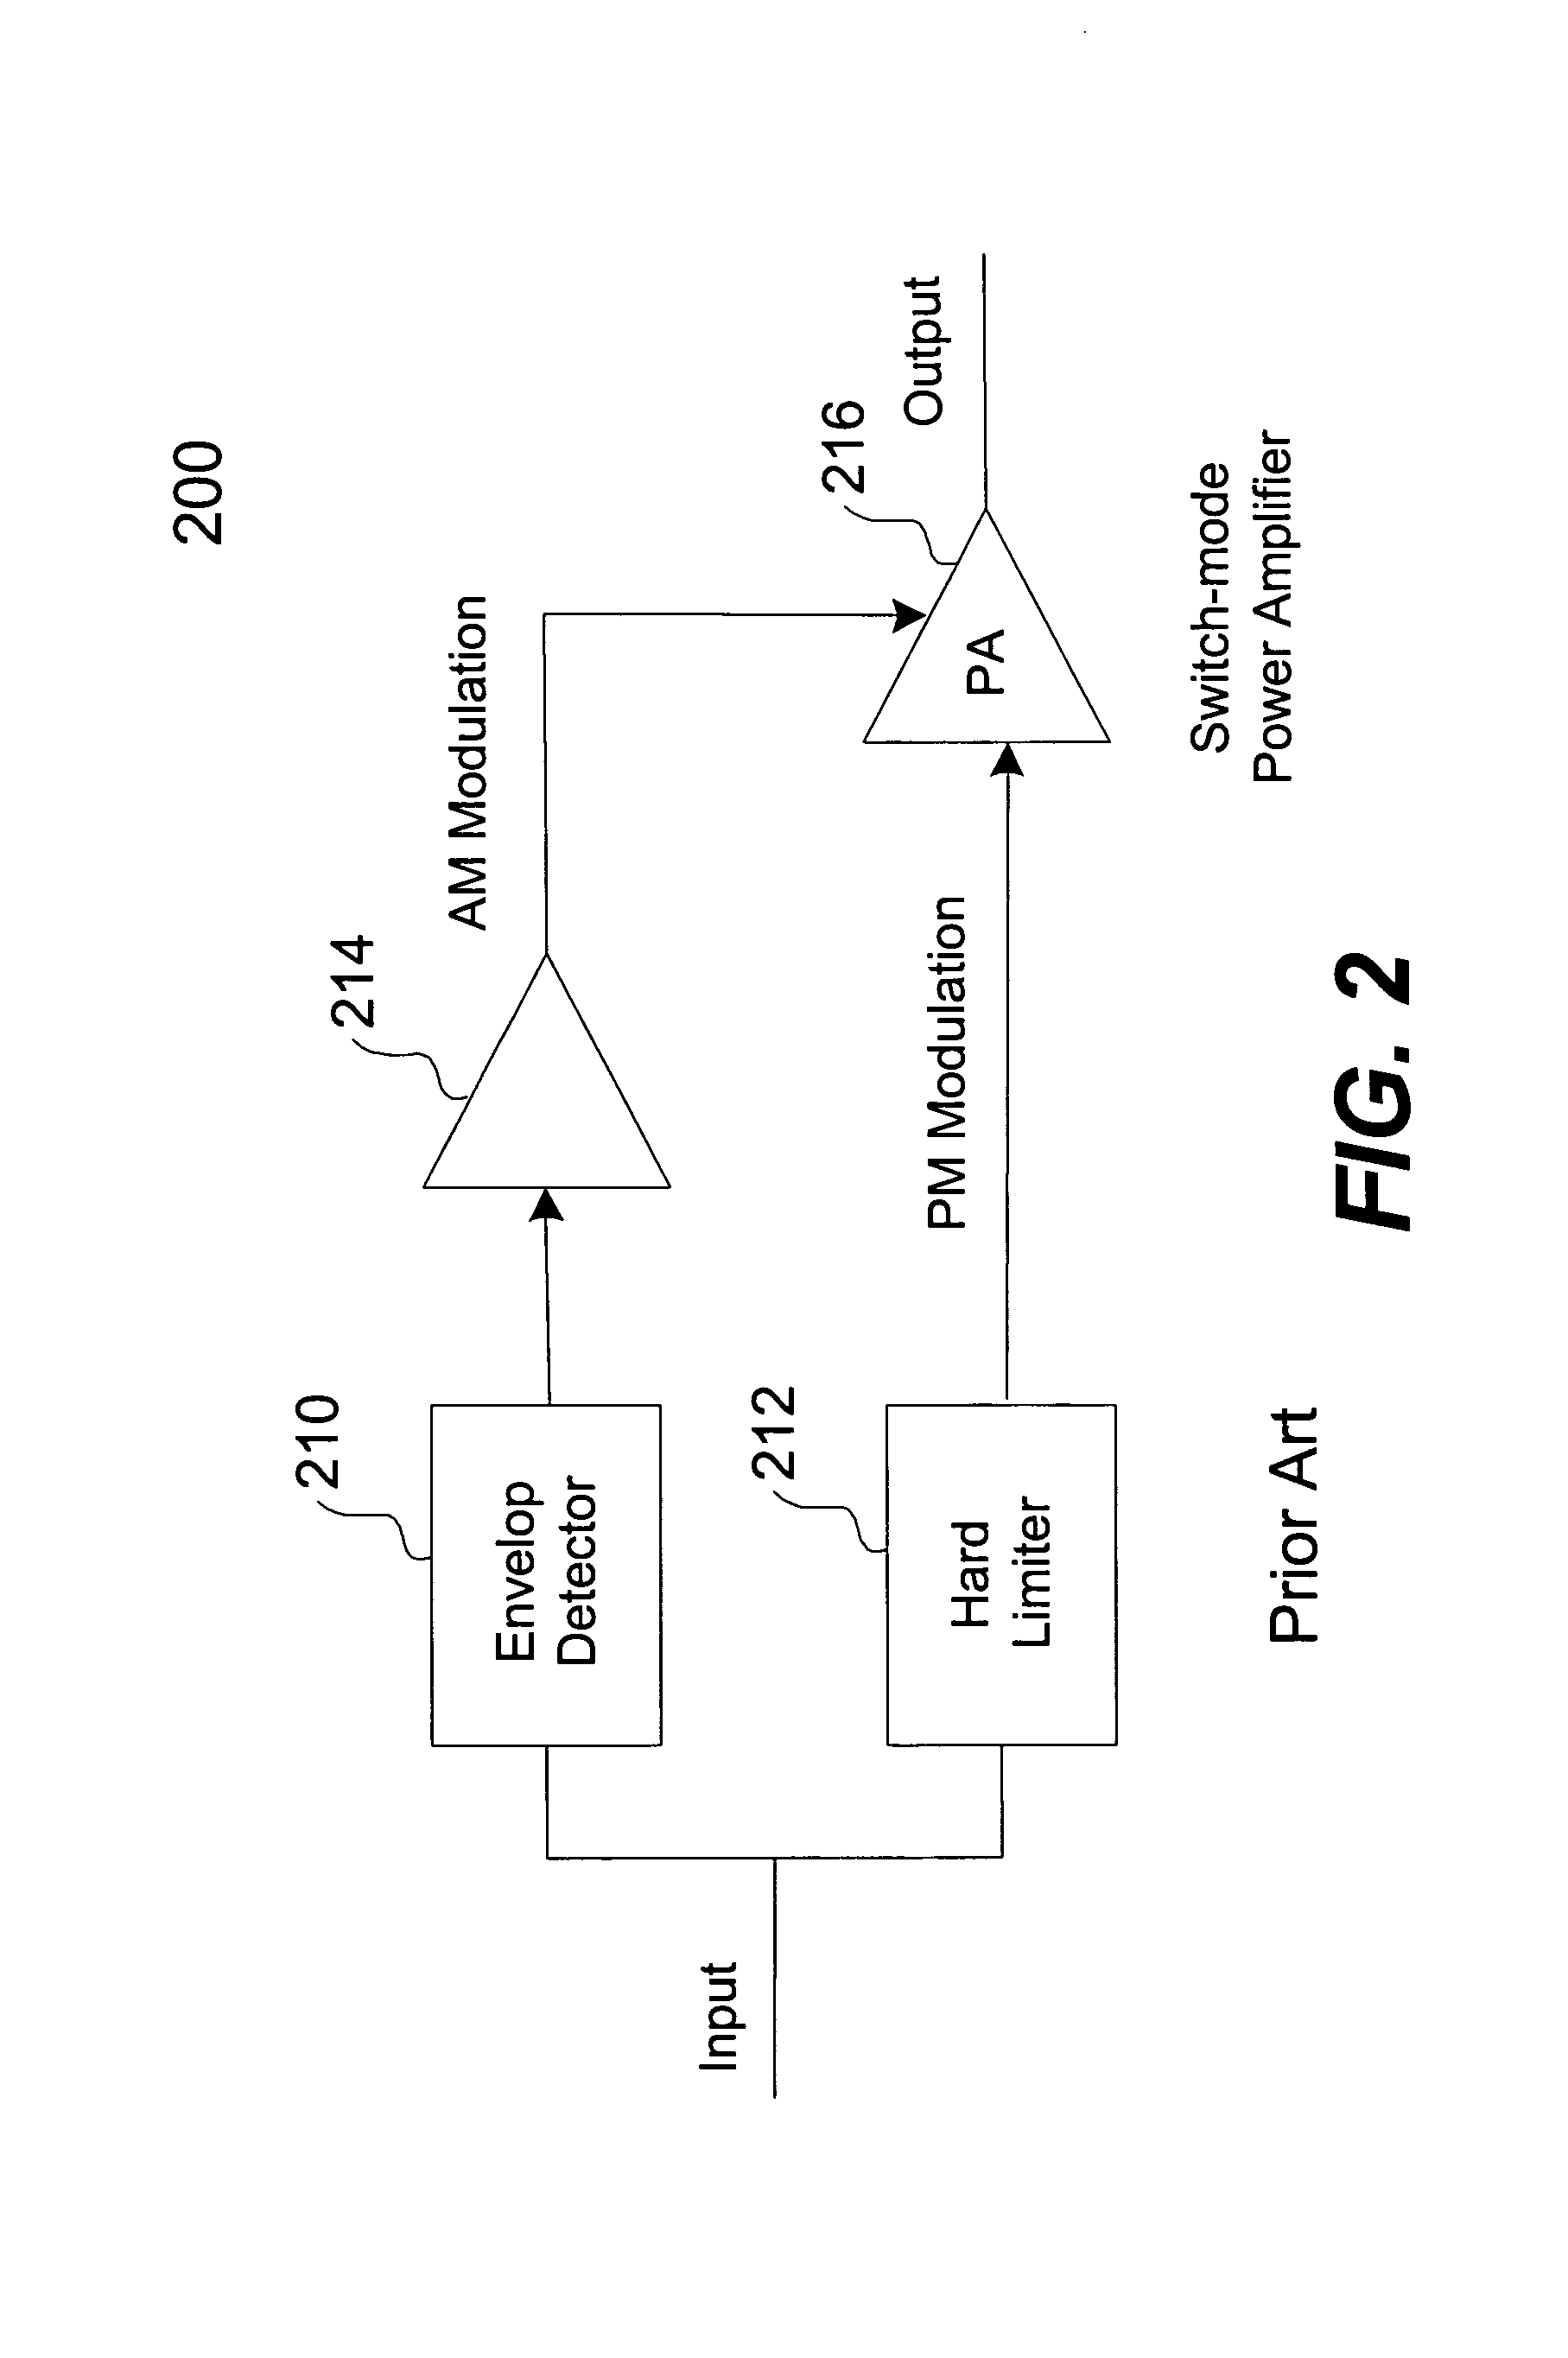 Direct modulation of a power amplifier with adaptive digital predistortion